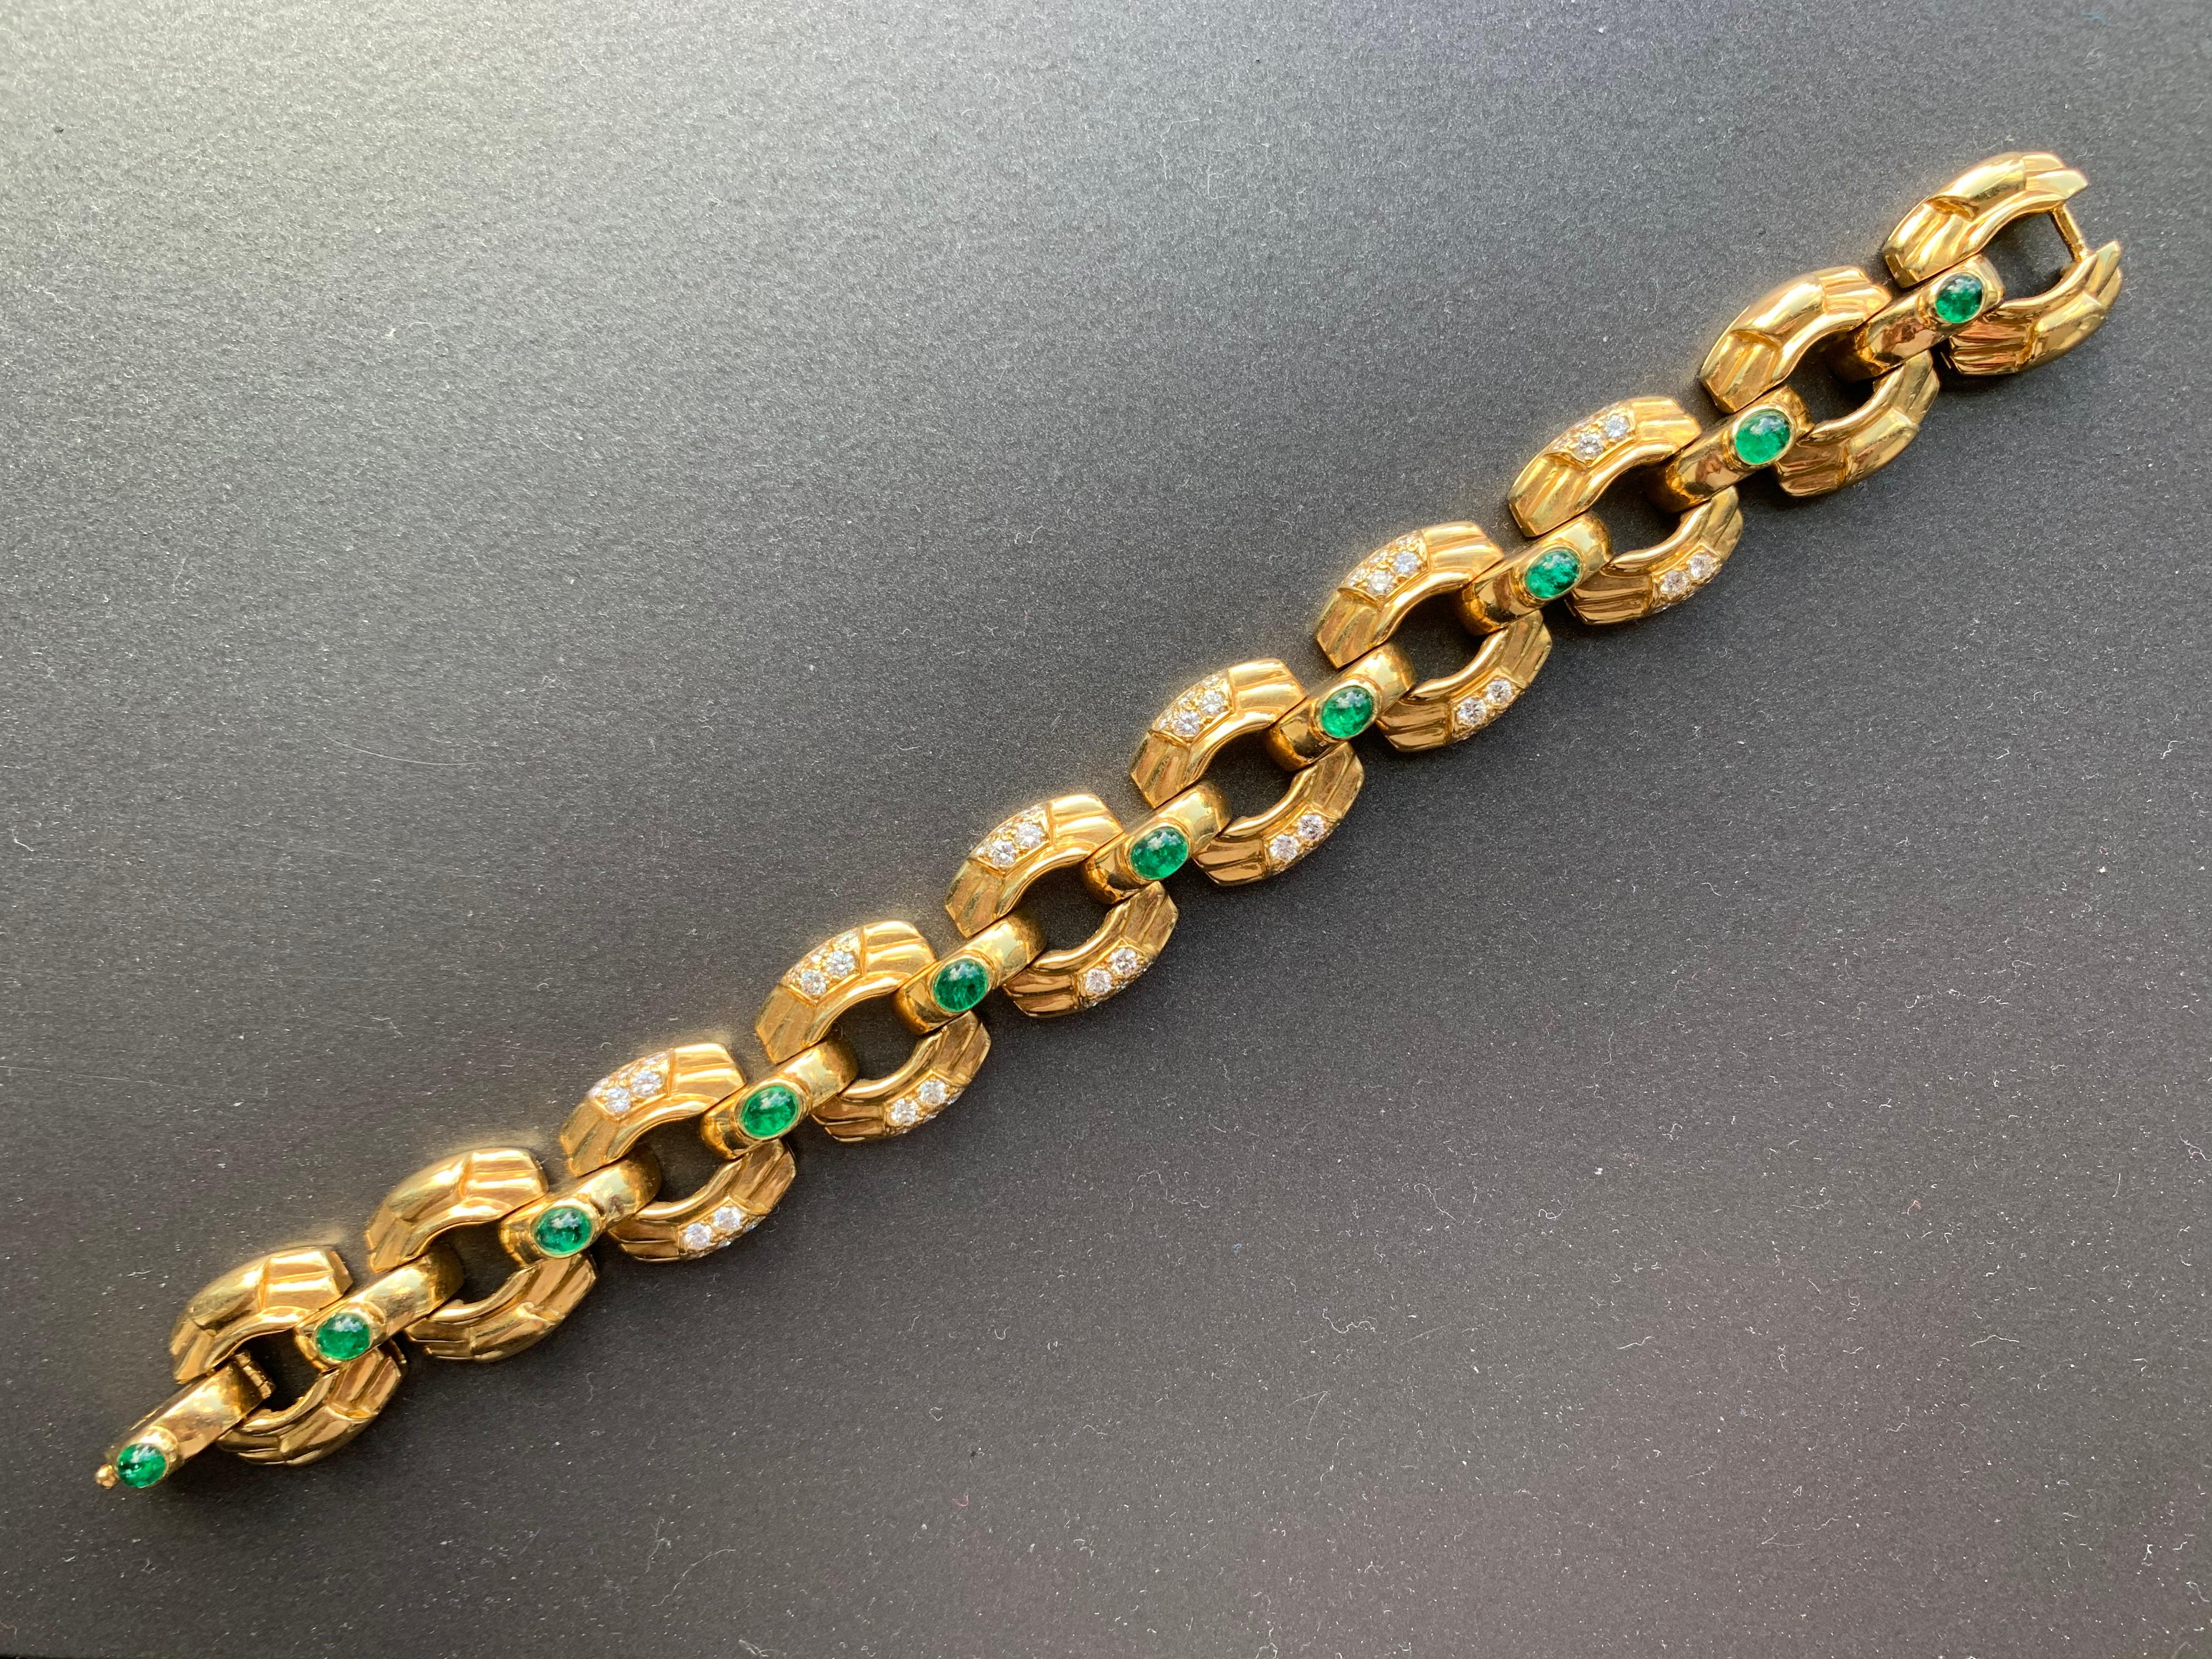 Men's Emerald and Diamond Bracelet

Set with ten gem cabochon emeralds

Set with 60 diamonds weighing approx total 3.50 cts

18 karat gold

Made circa 1970

Approx 7.50 inches long